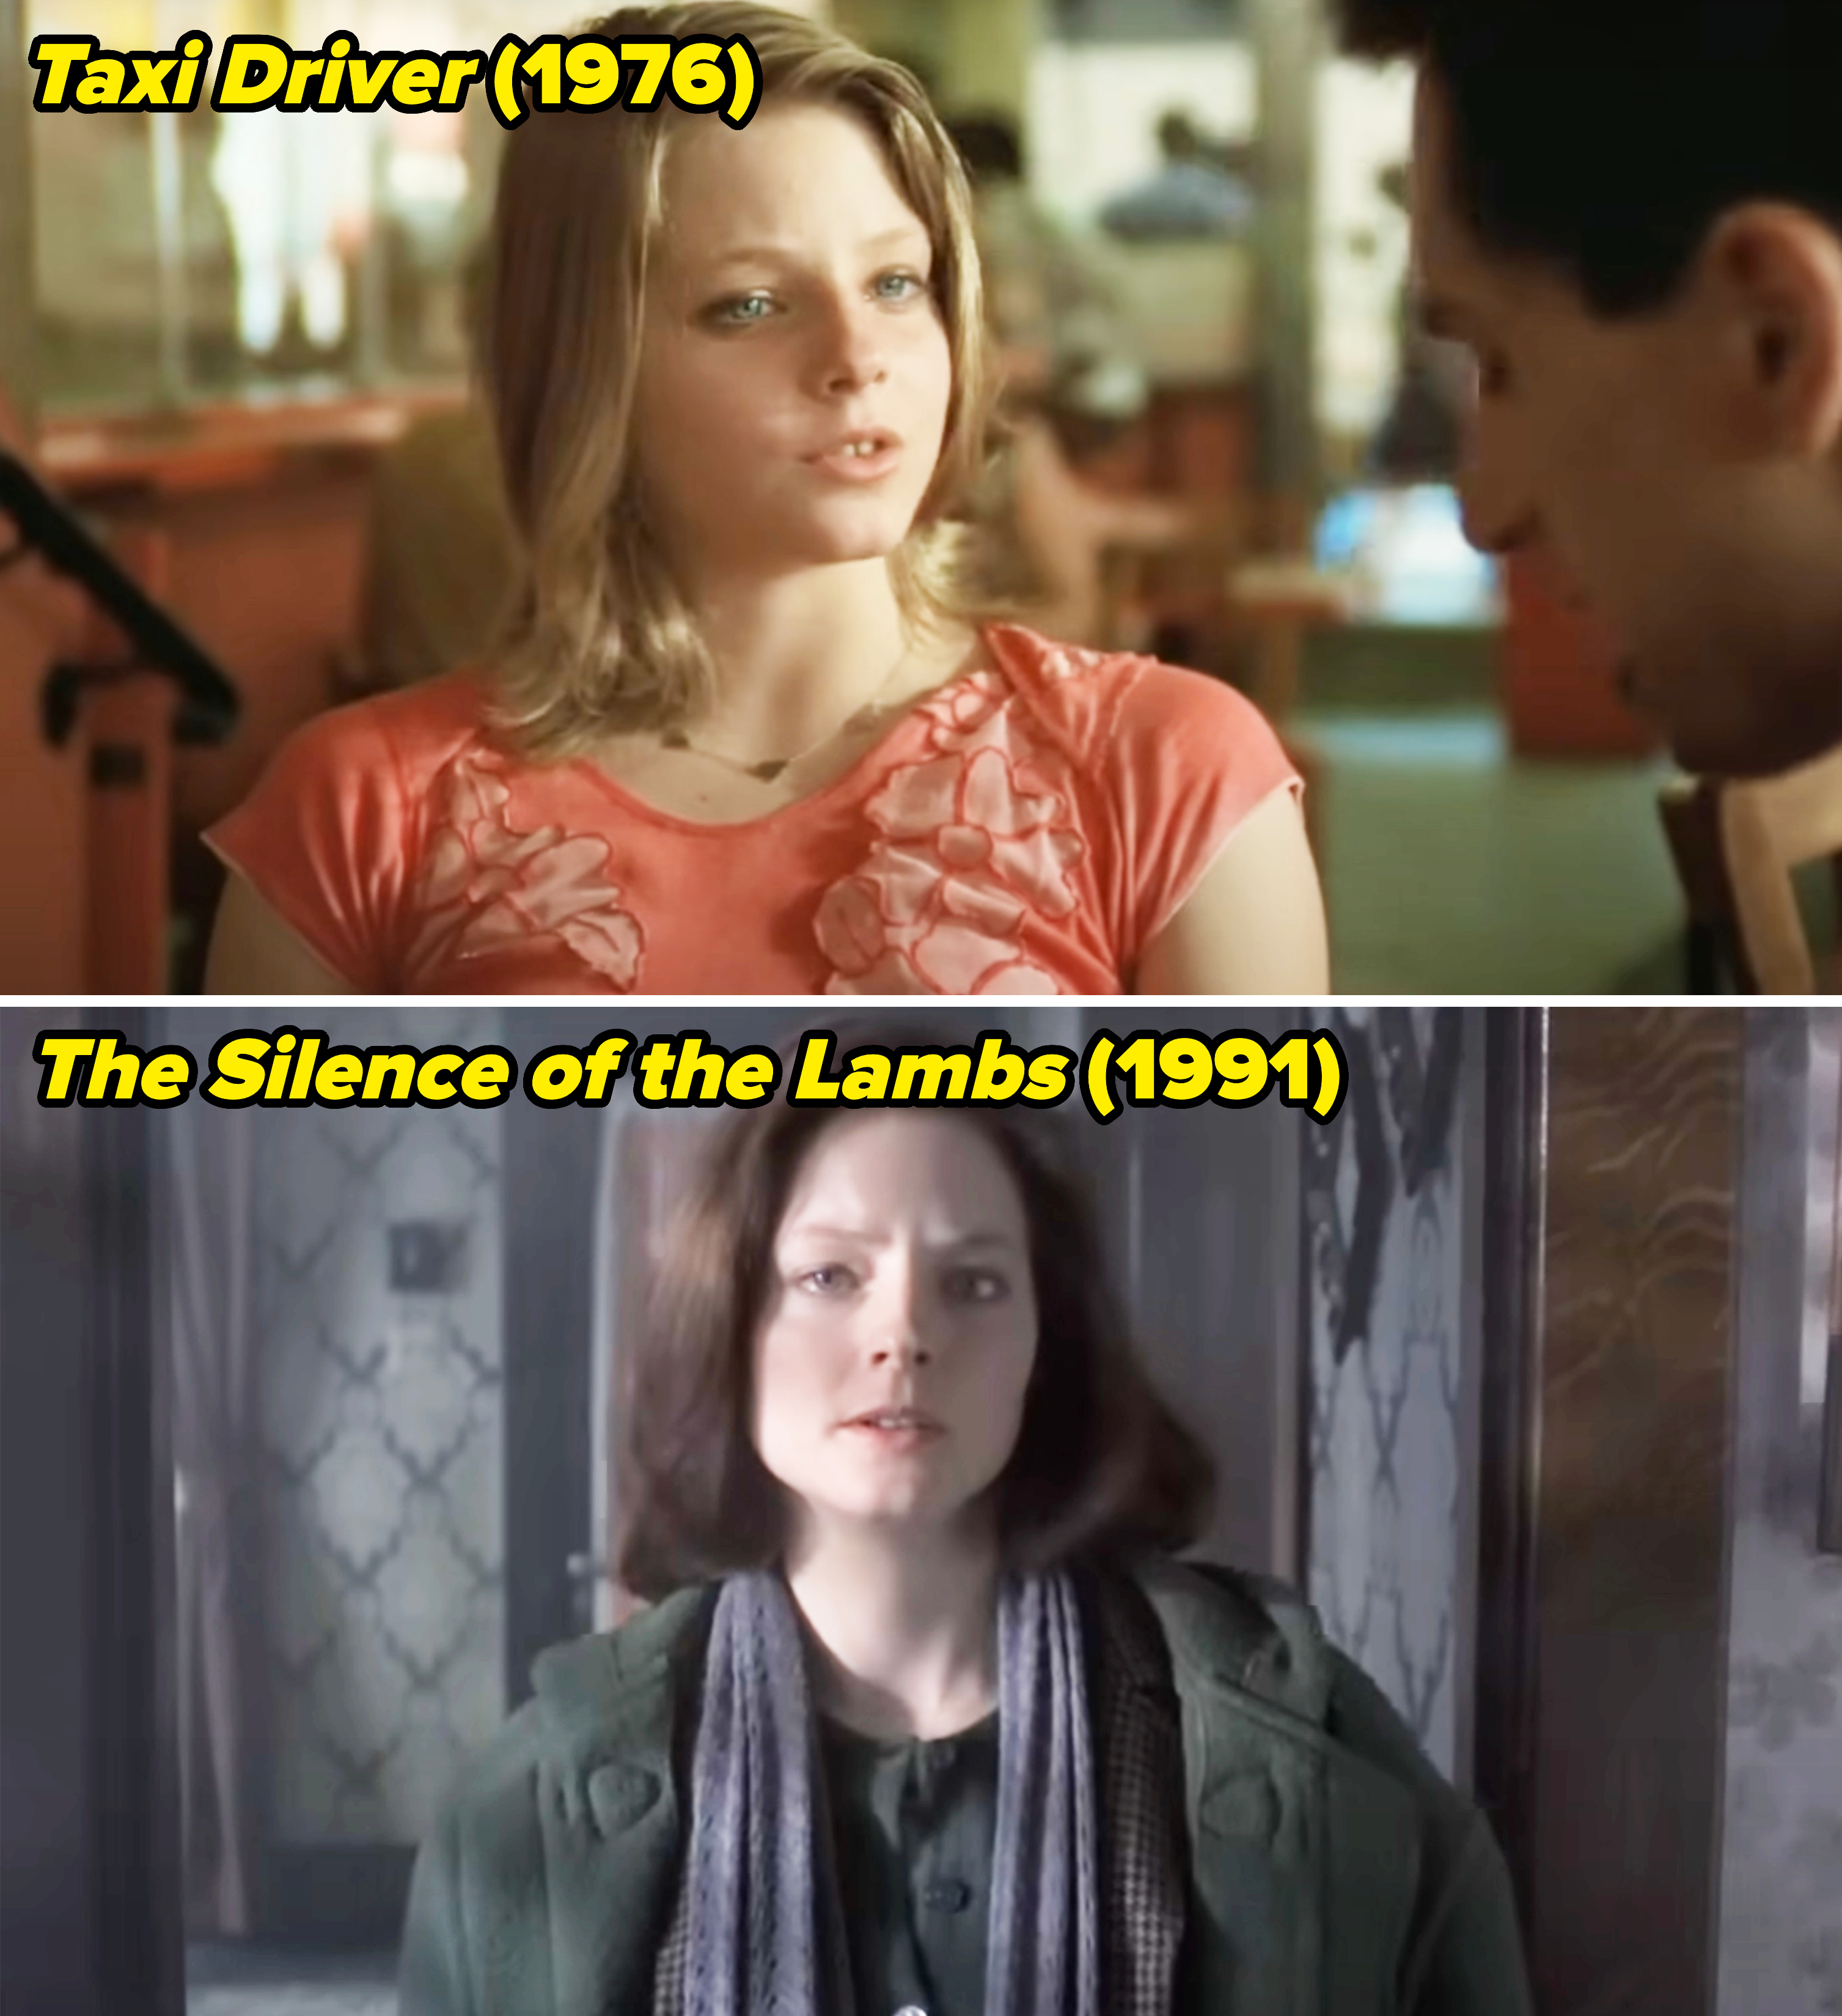 closeup of her in taxi driver and then in silence of the lambs